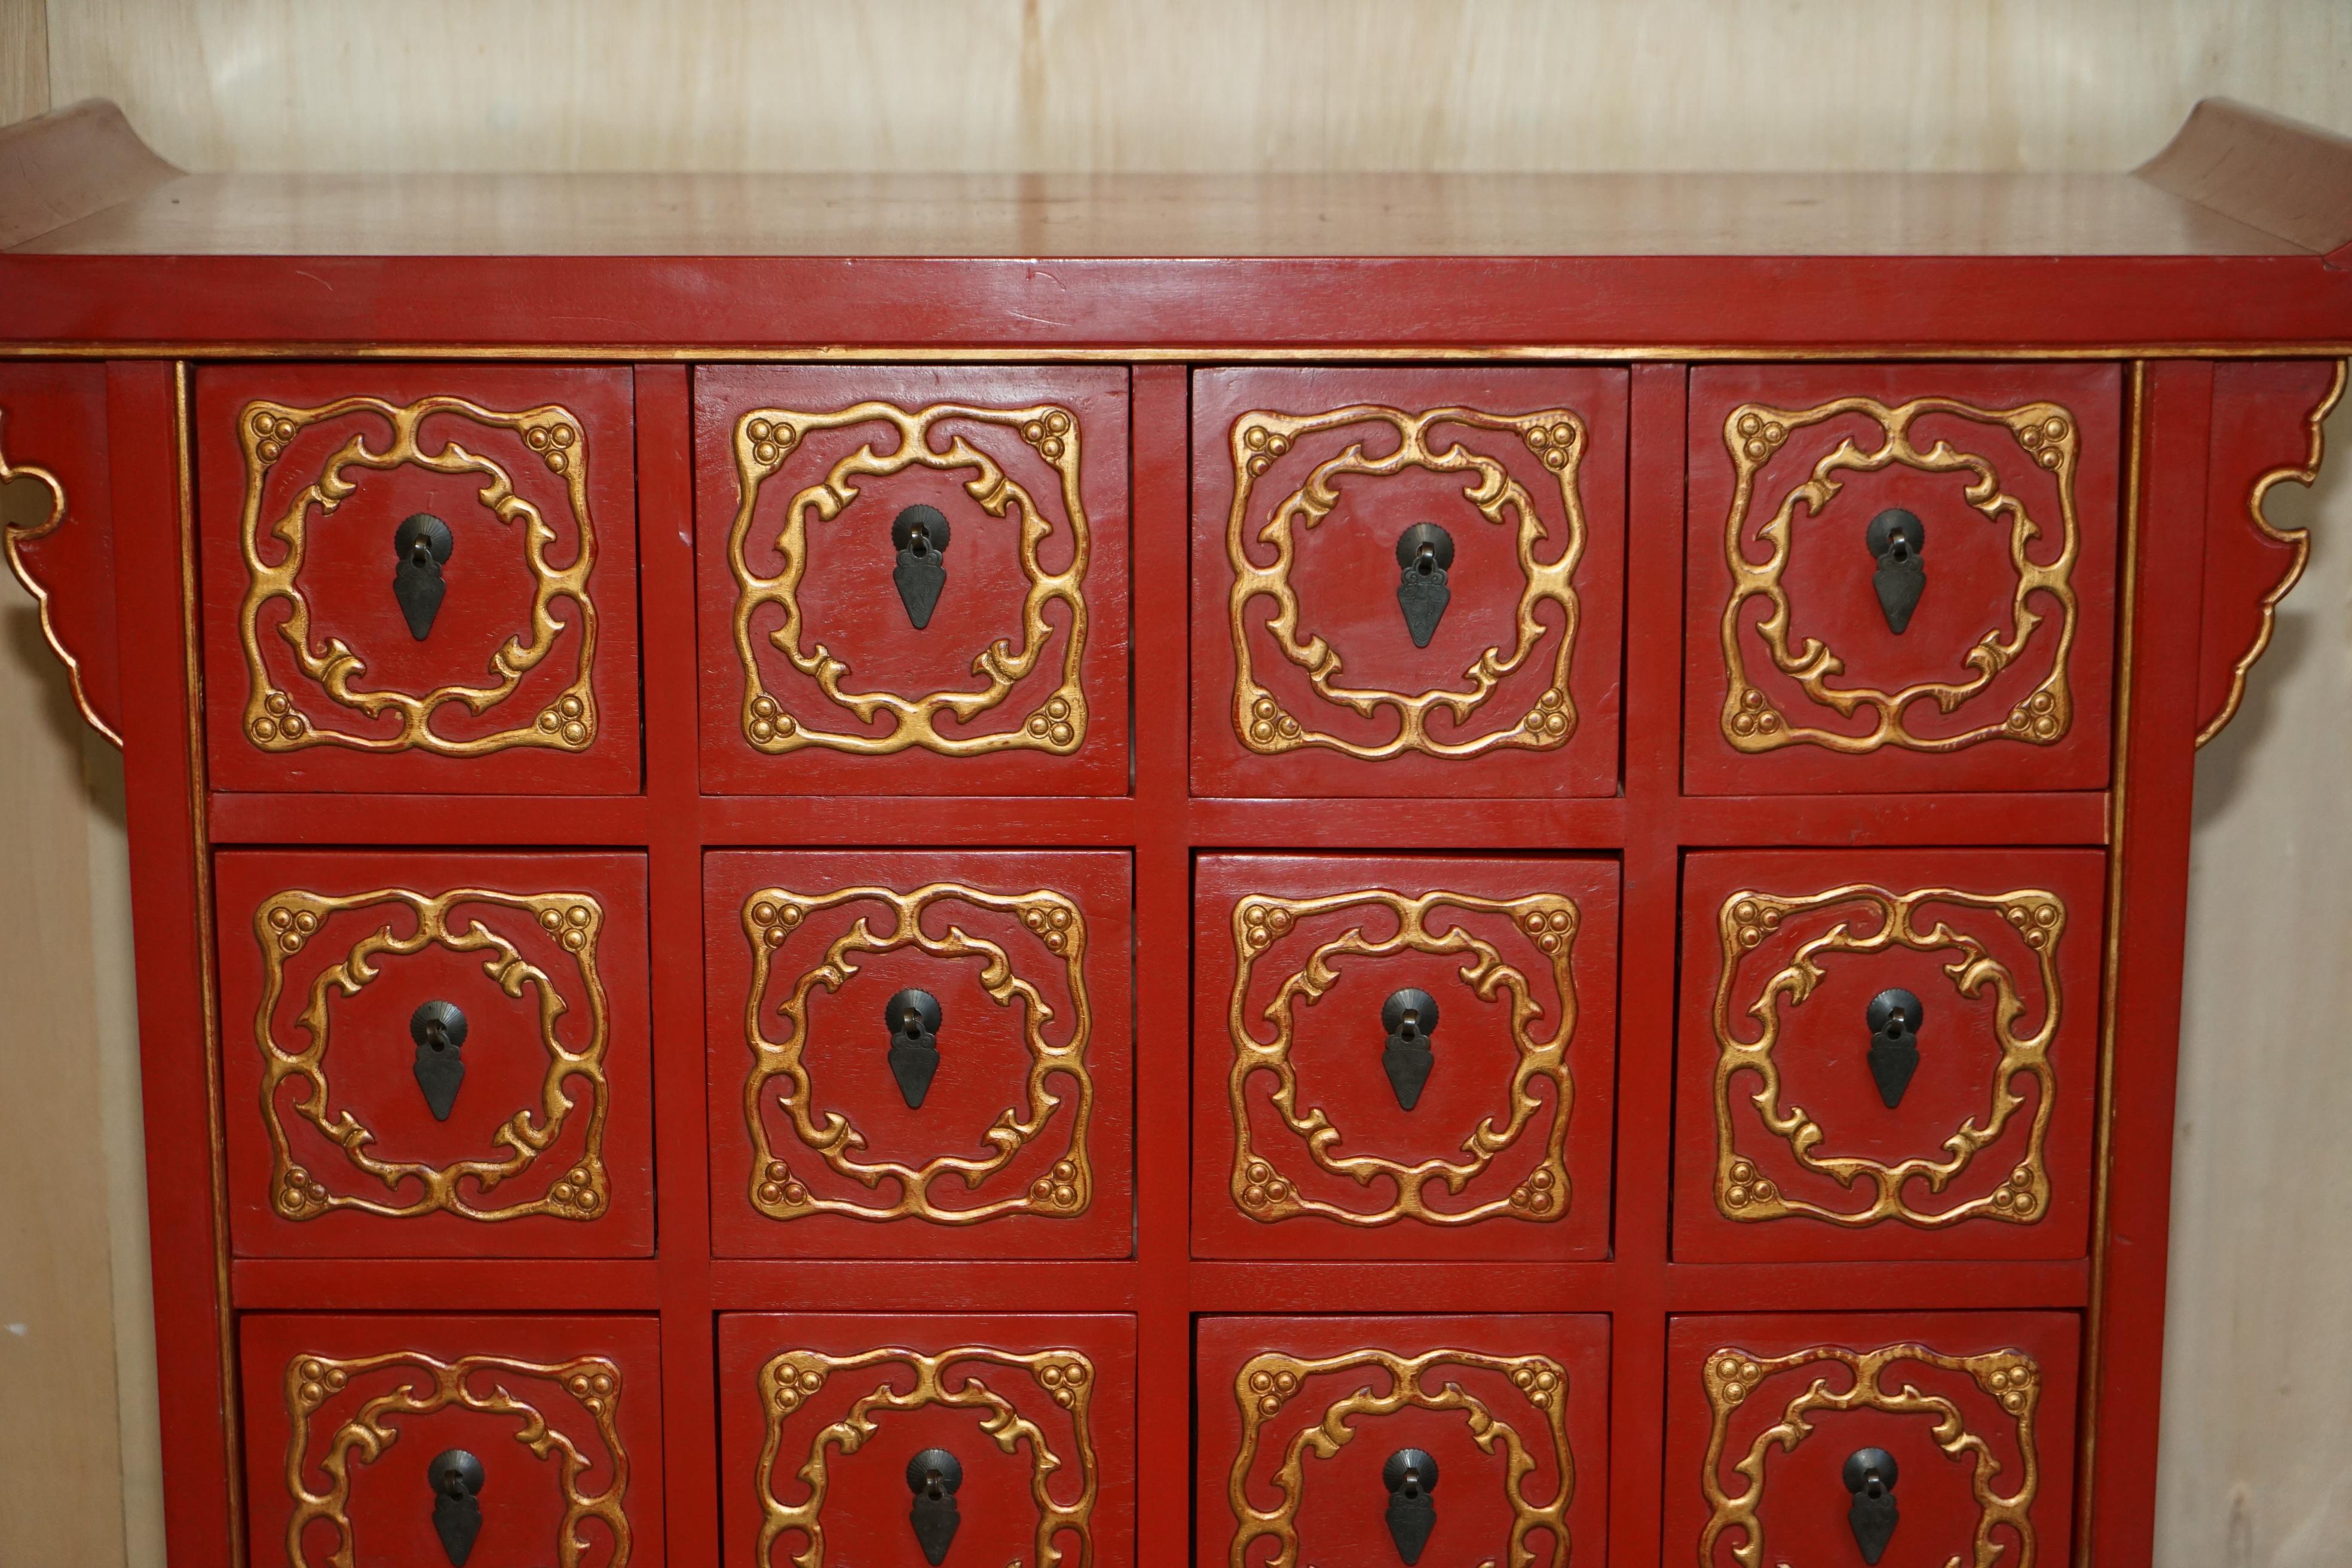 Rare Oriental Chinese Export Vintage Cabinet Lots of Drawers for Fine Teas For Sale 2